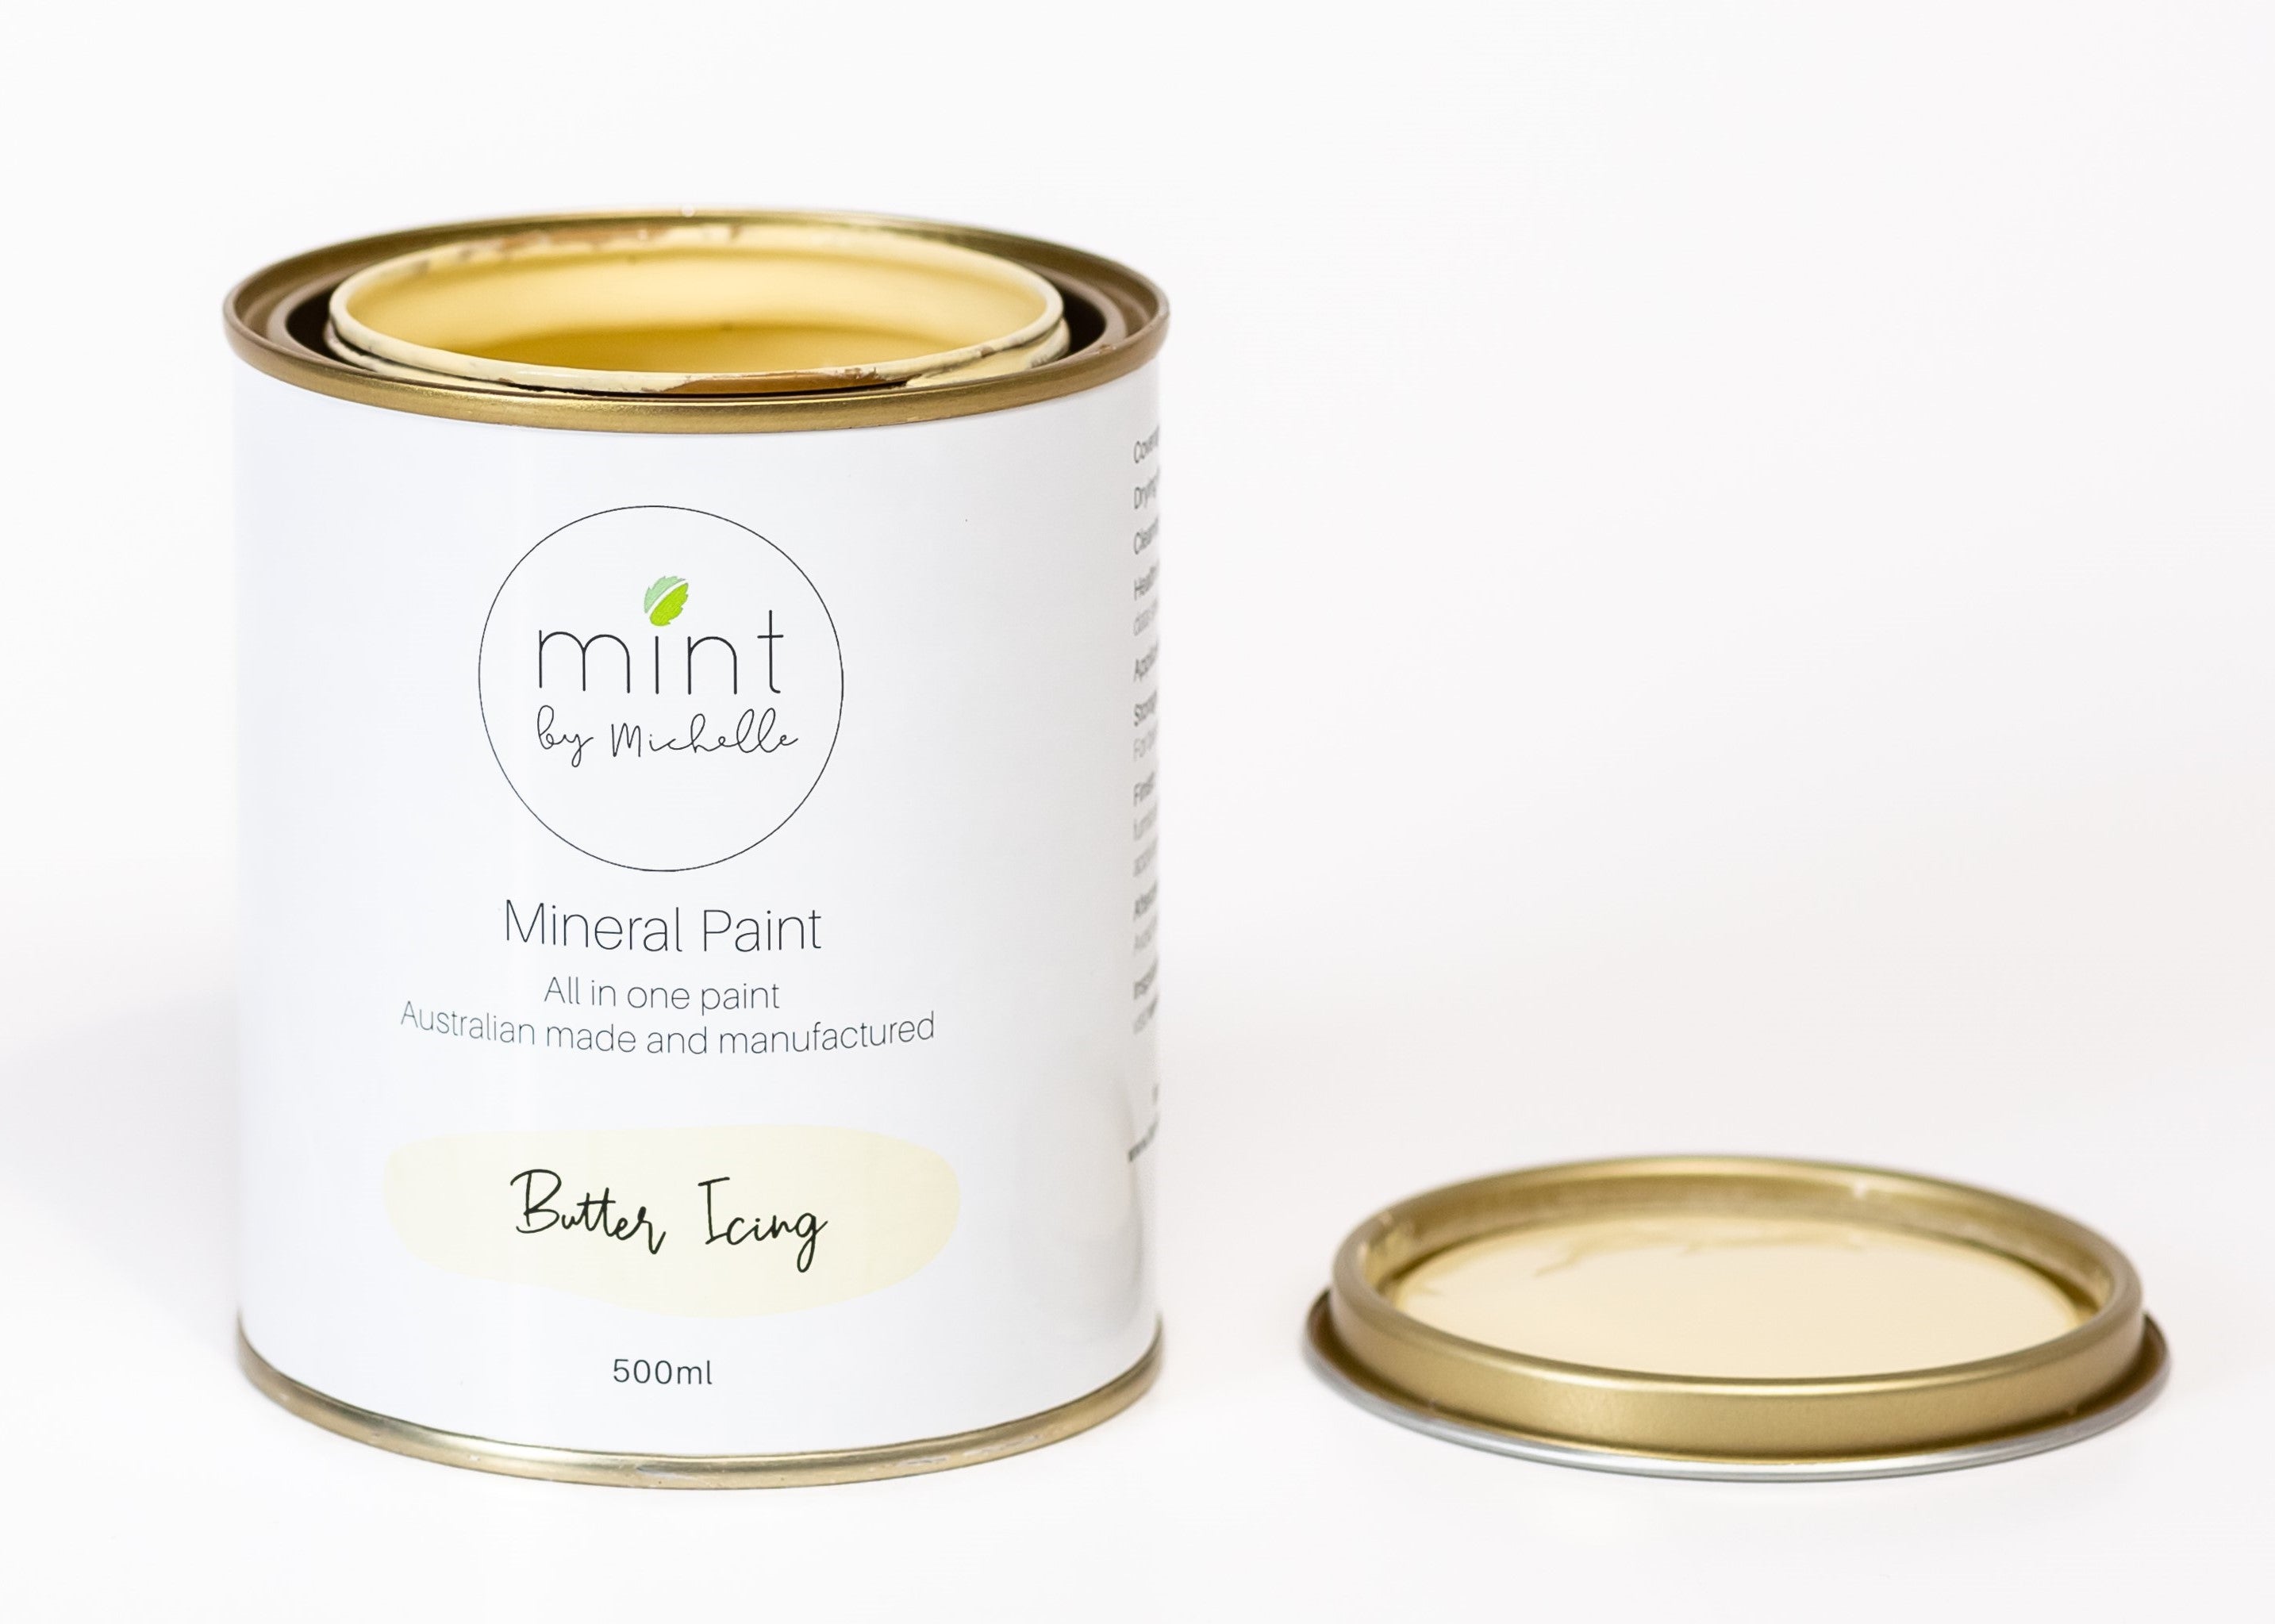 Butter Icing Mint Mineral Paint